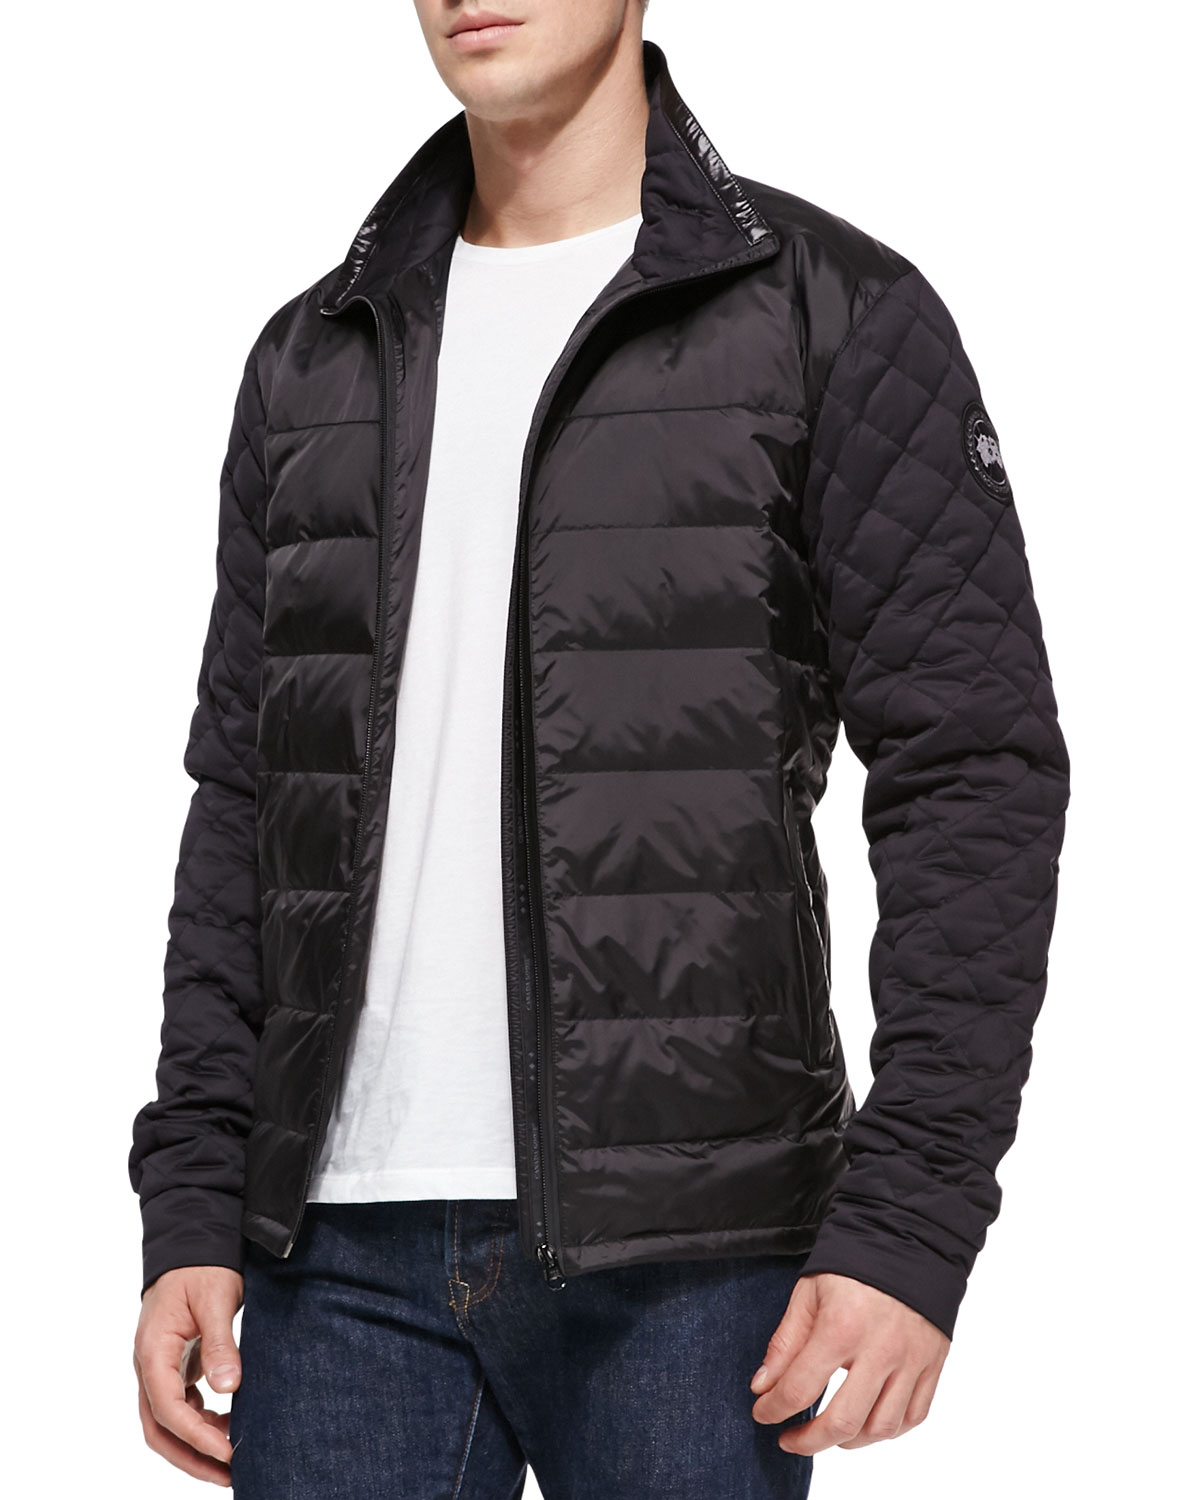 Canada Goose trillium parka replica store - Low Price And High Quality Canada Goose Ridge Pants Sale For Cheap